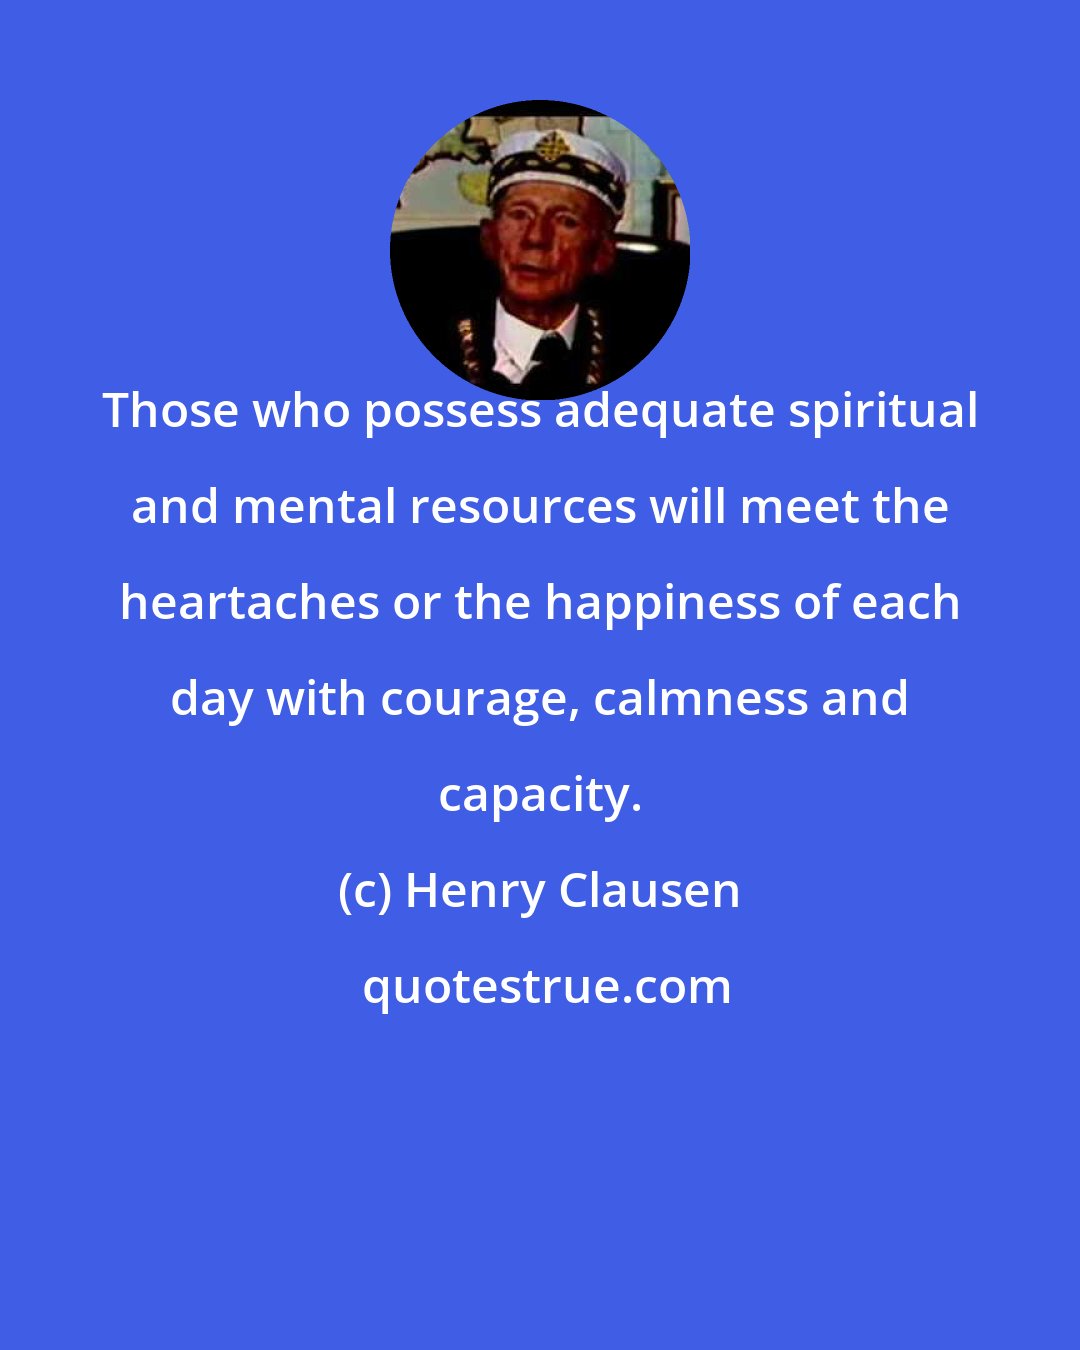 Henry Clausen: Those who possess adequate spiritual and mental resources will meet the heartaches or the happiness of each day with courage, calmness and capacity.